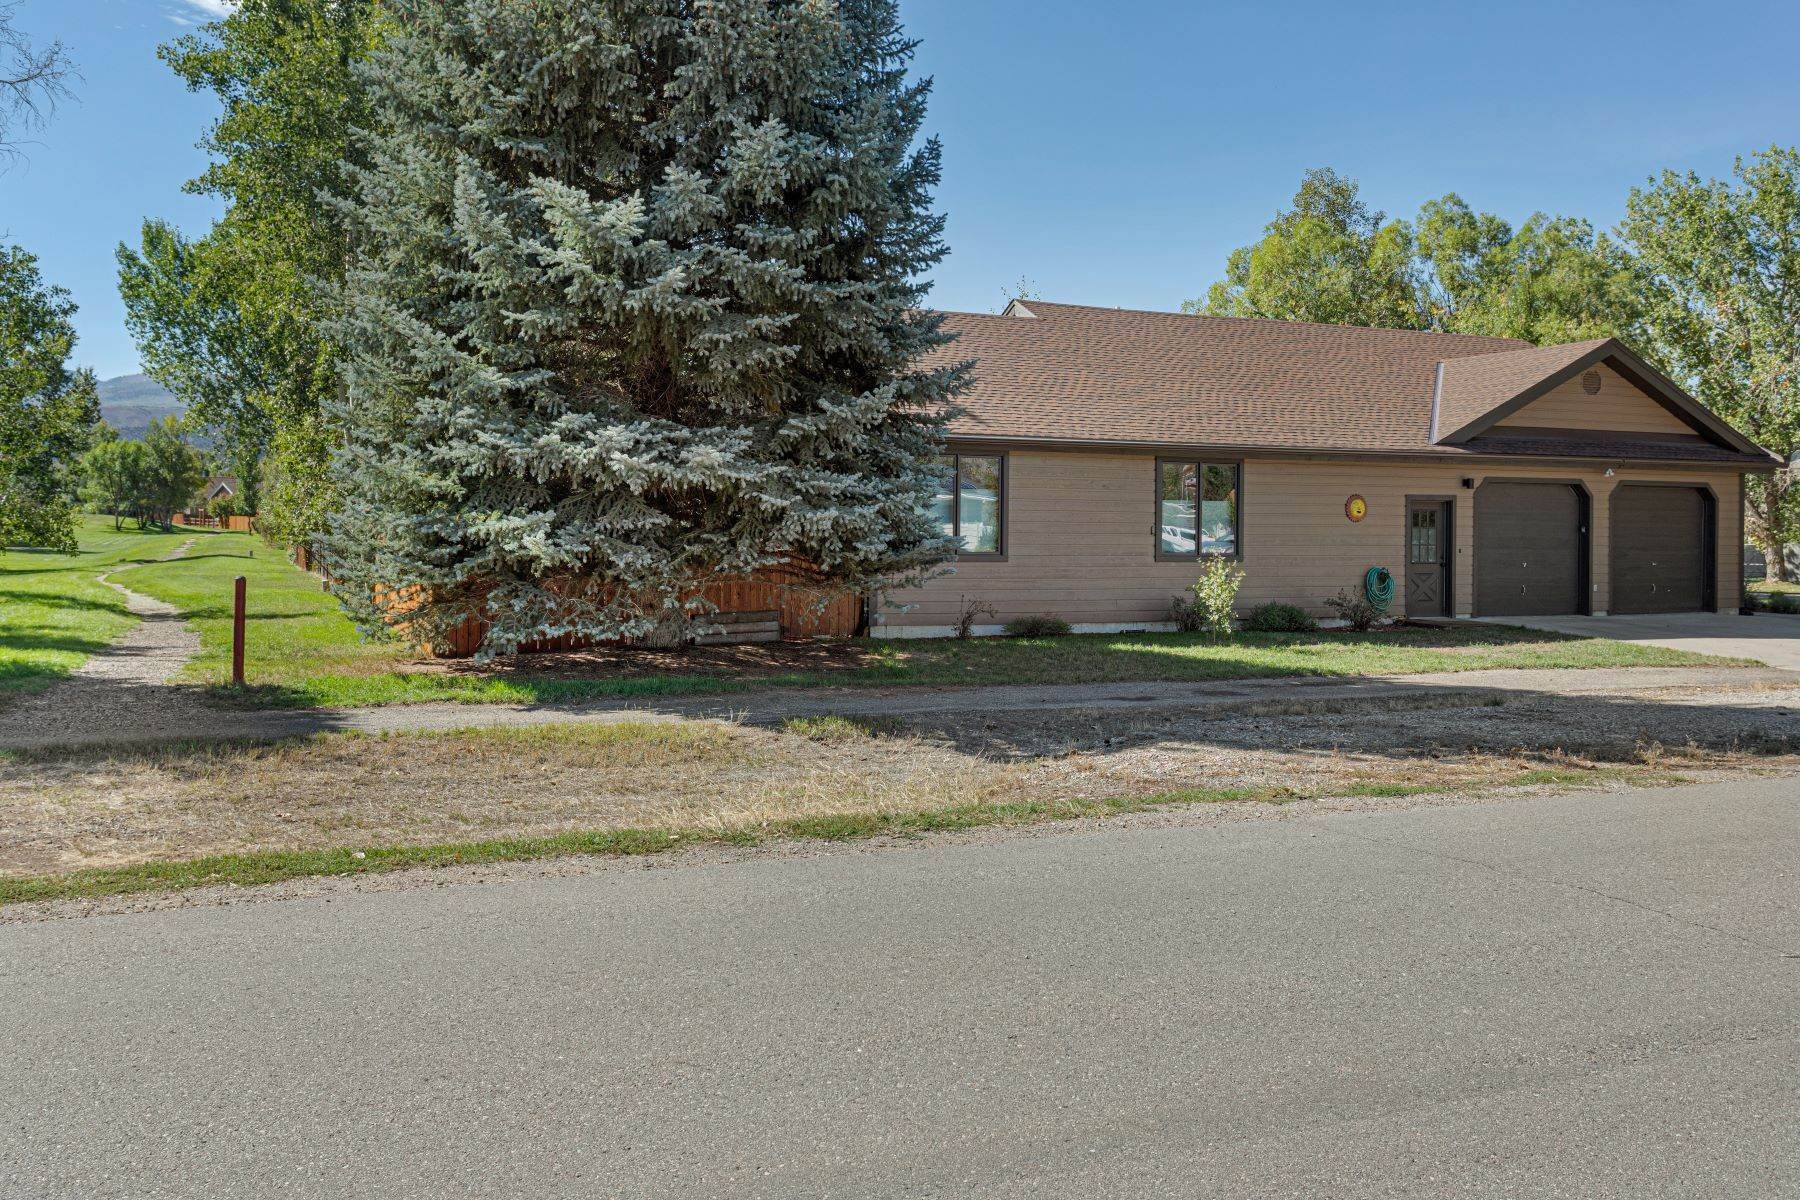 27. Single Family Homes for Active at Single Family home in Bull Run 700 Bull Run Eagle, Colorado 81631 United States